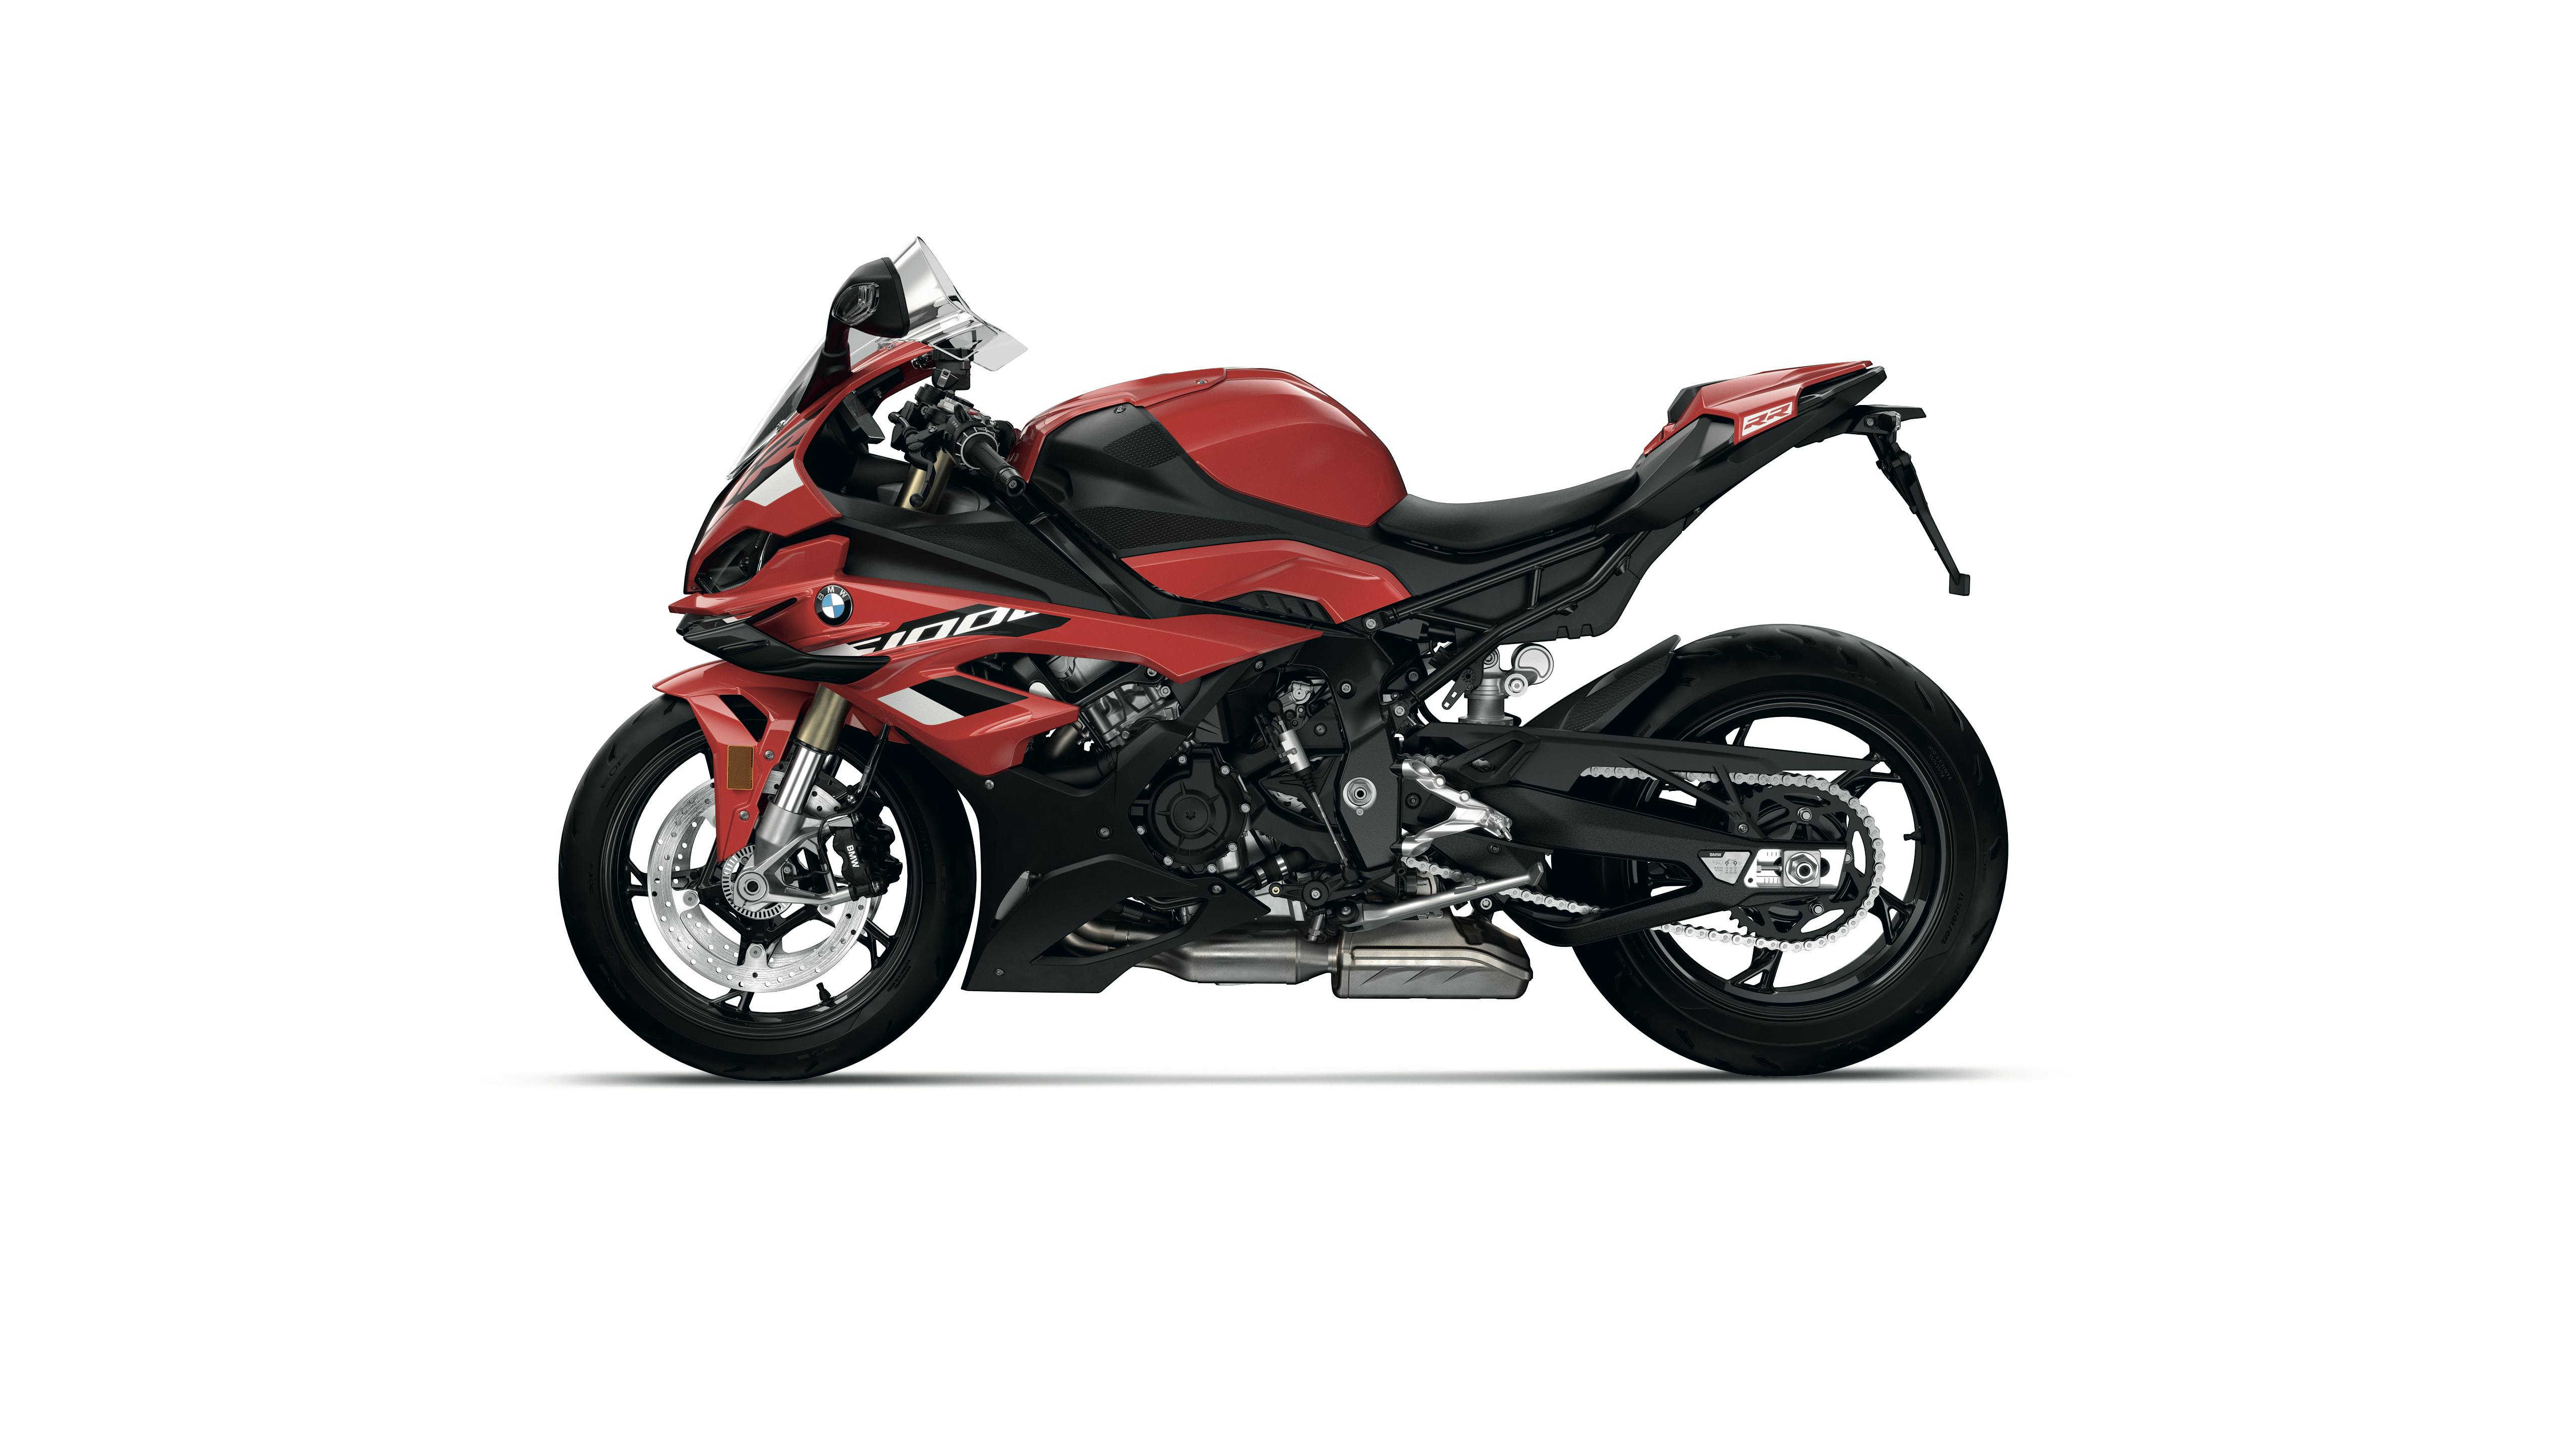 BMW S 1000 RR Sport in racing red colour